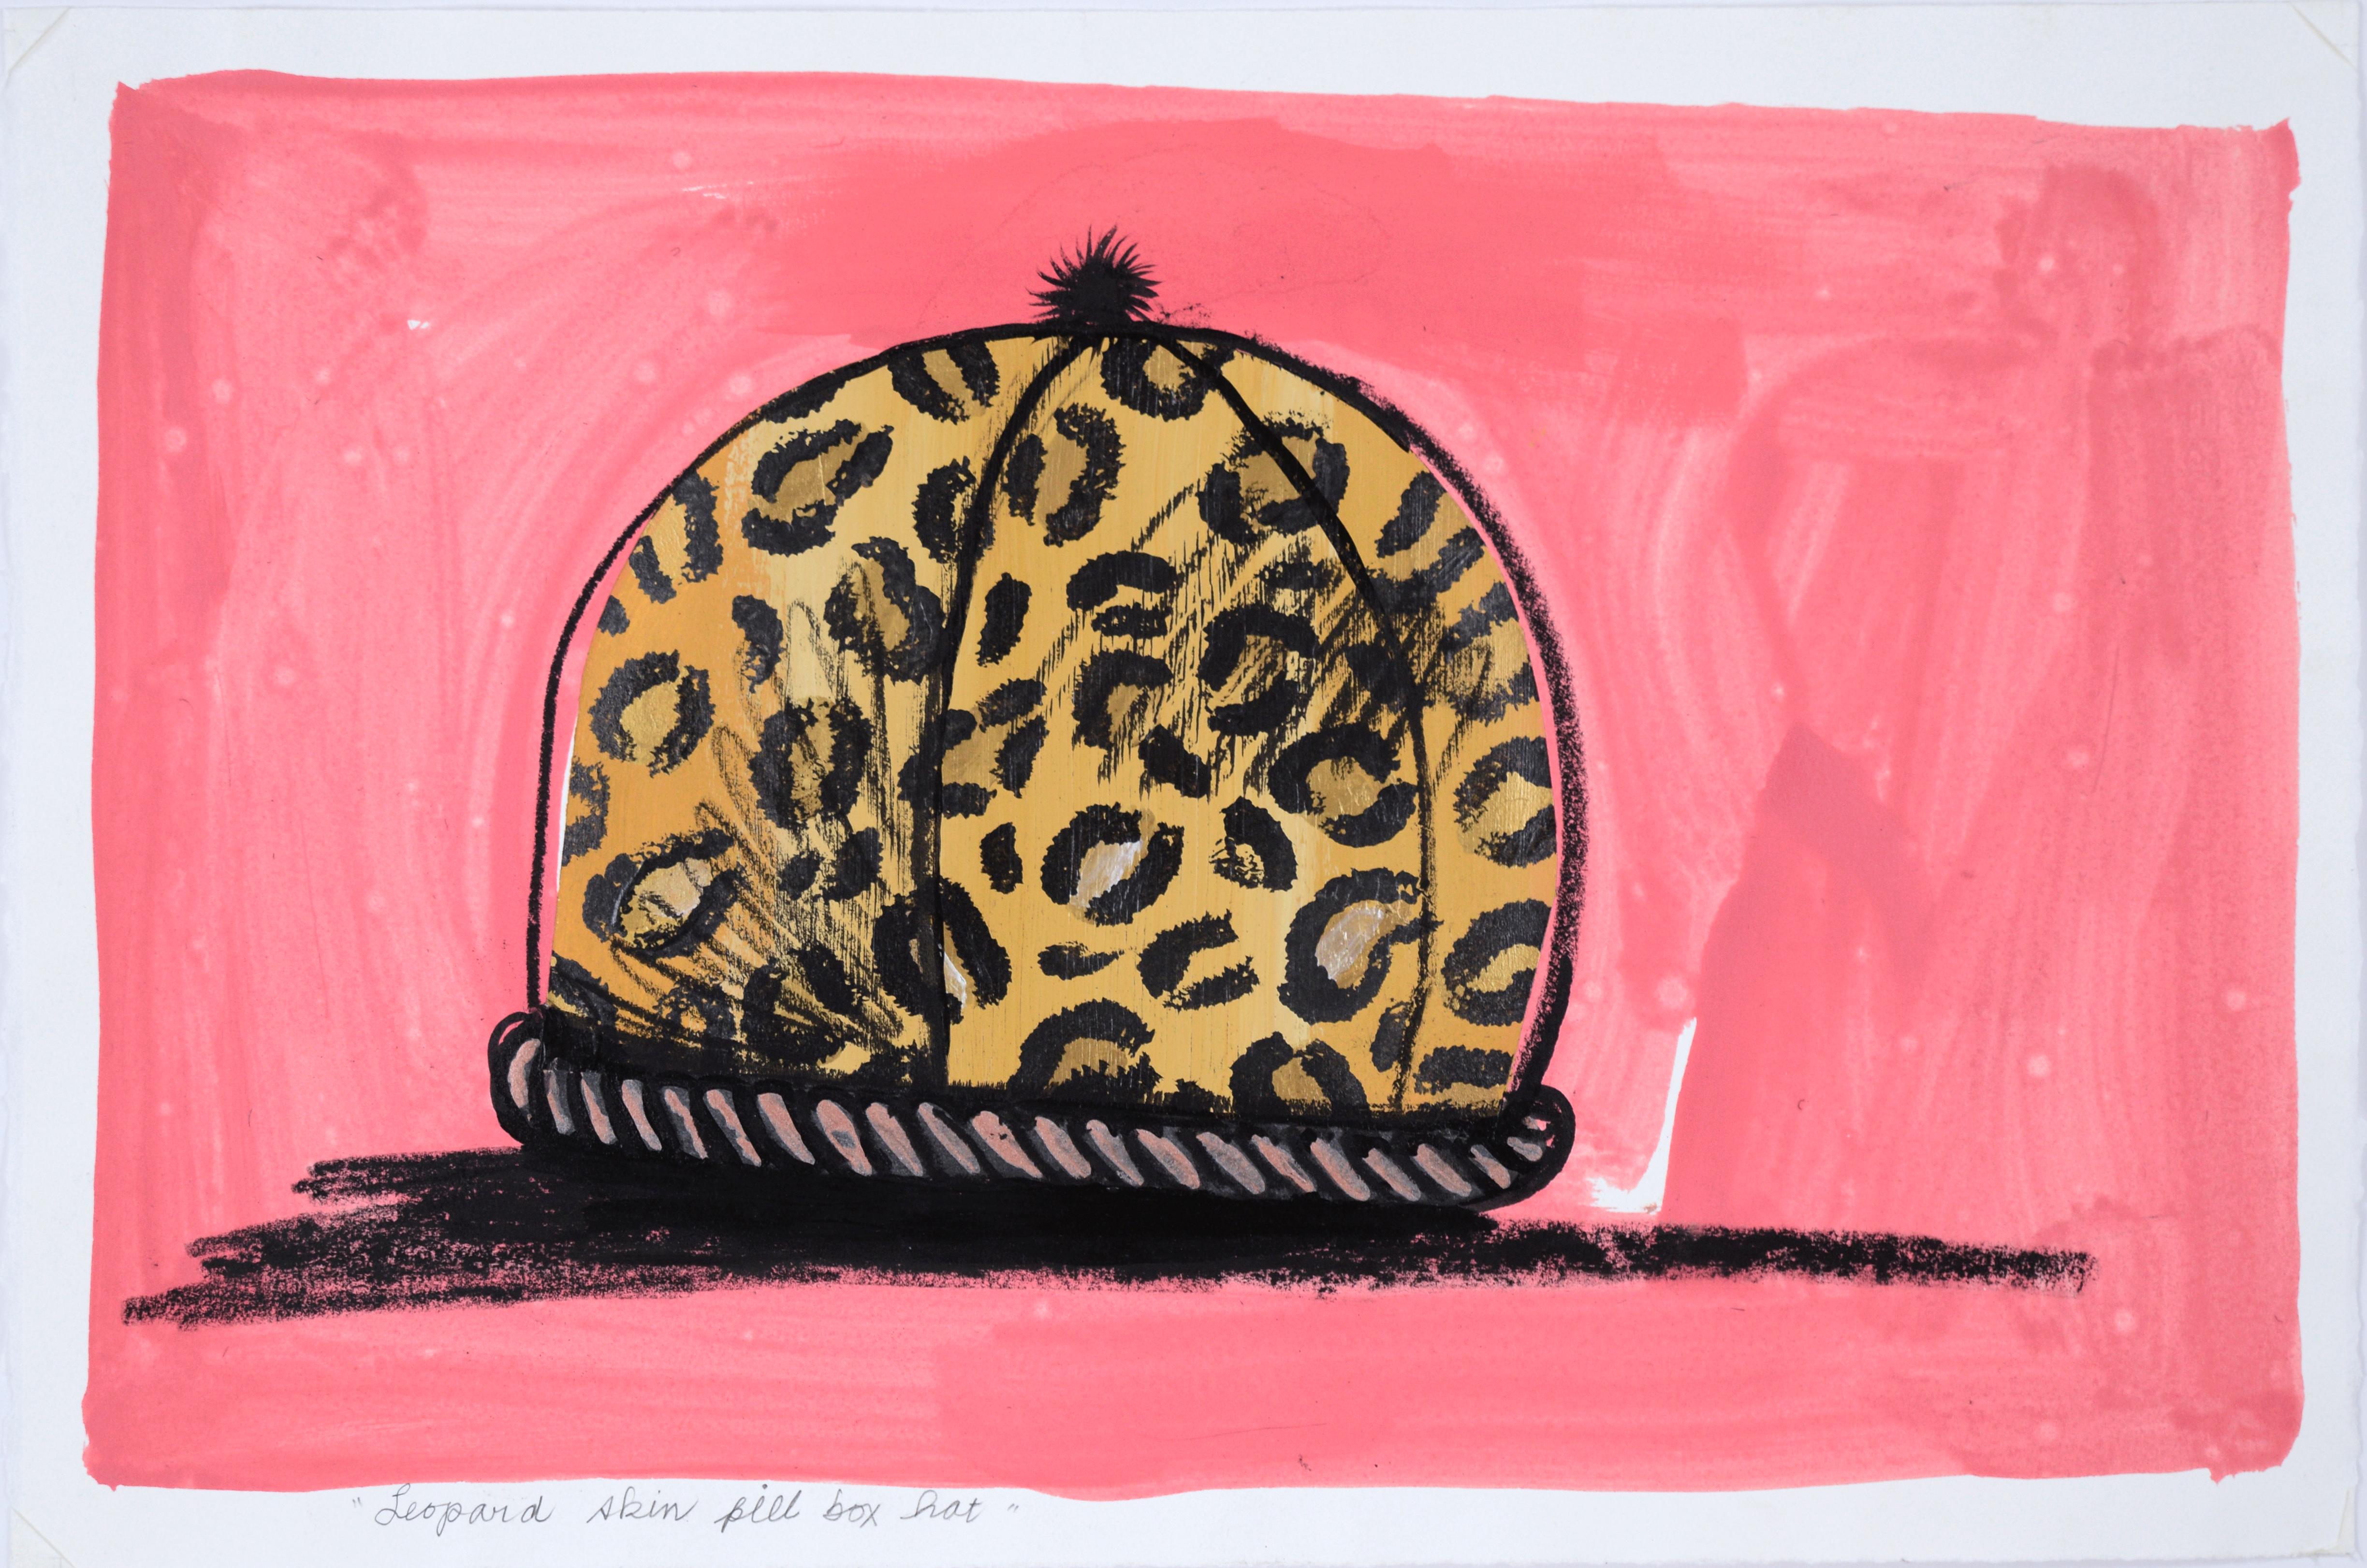 Vivid and dynamic painting of a leopard print pillbox hat by Marc Foster Grant (American, b. 1947). Playful depiction of a pillbox hat rendered in leopard print. The hat is contrasted against a bright pink background. This is a part of Foster